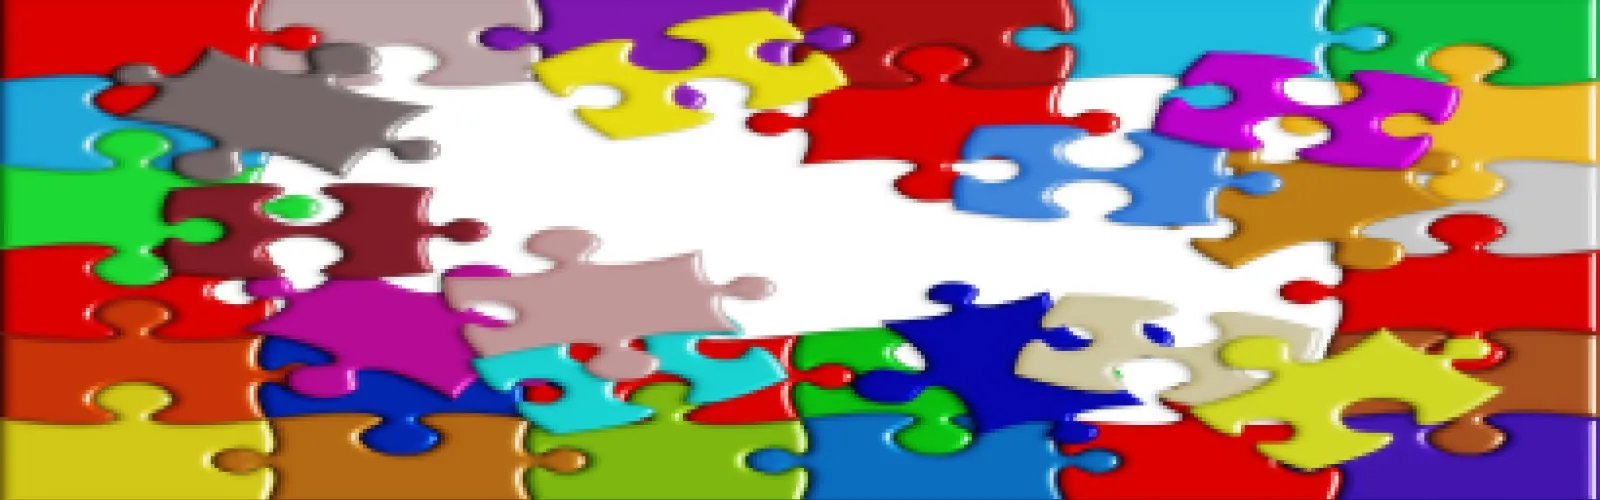 Different colored puzzle pieces being put together